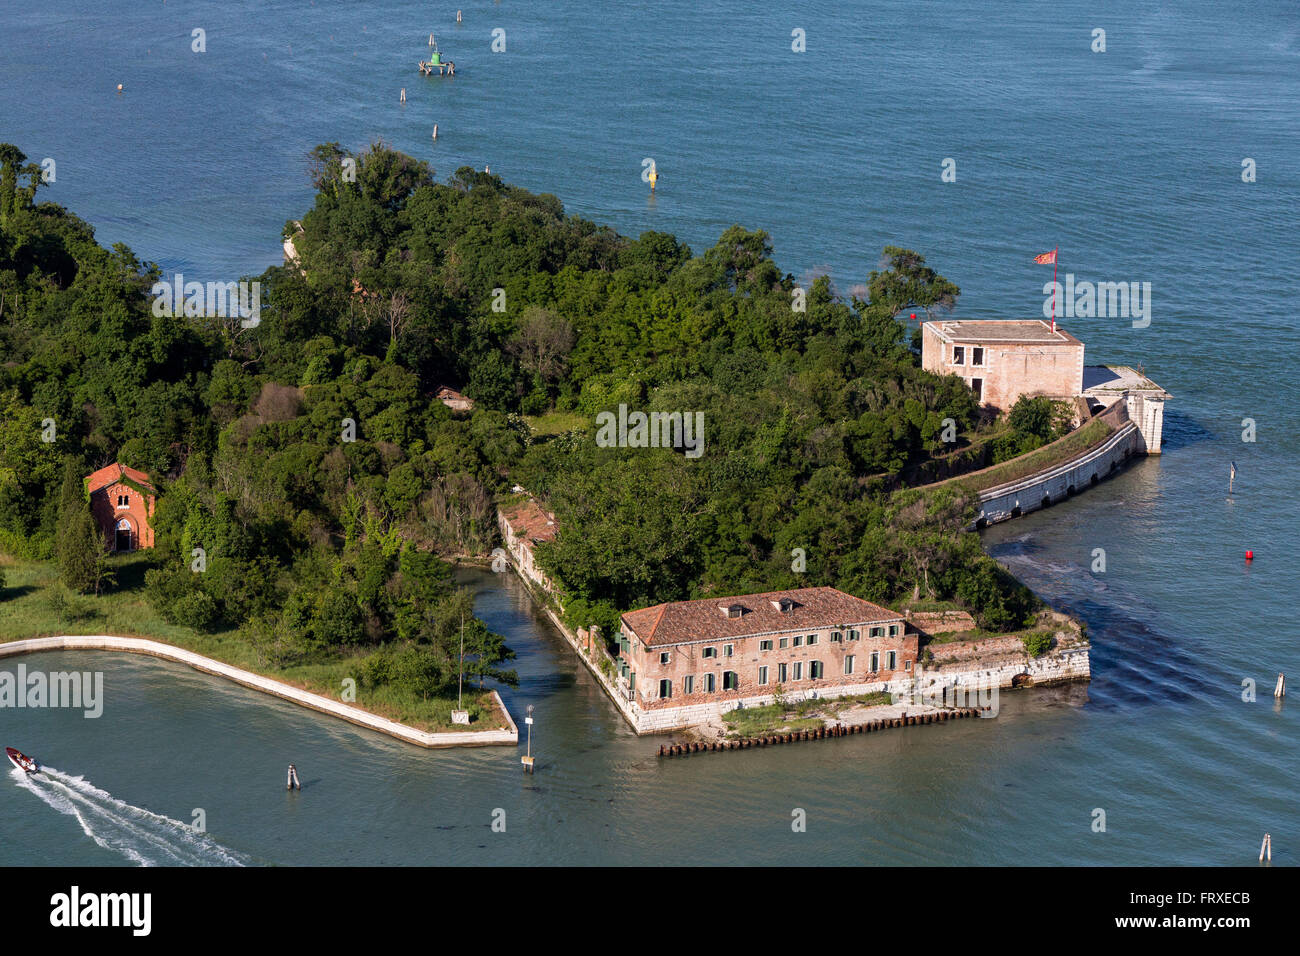 Aerial view of islands in the Venetian lagoon, fortification of San Andrea next to the islands of Le Vignole and La Certosa, Veneto, Italy Stock Photo